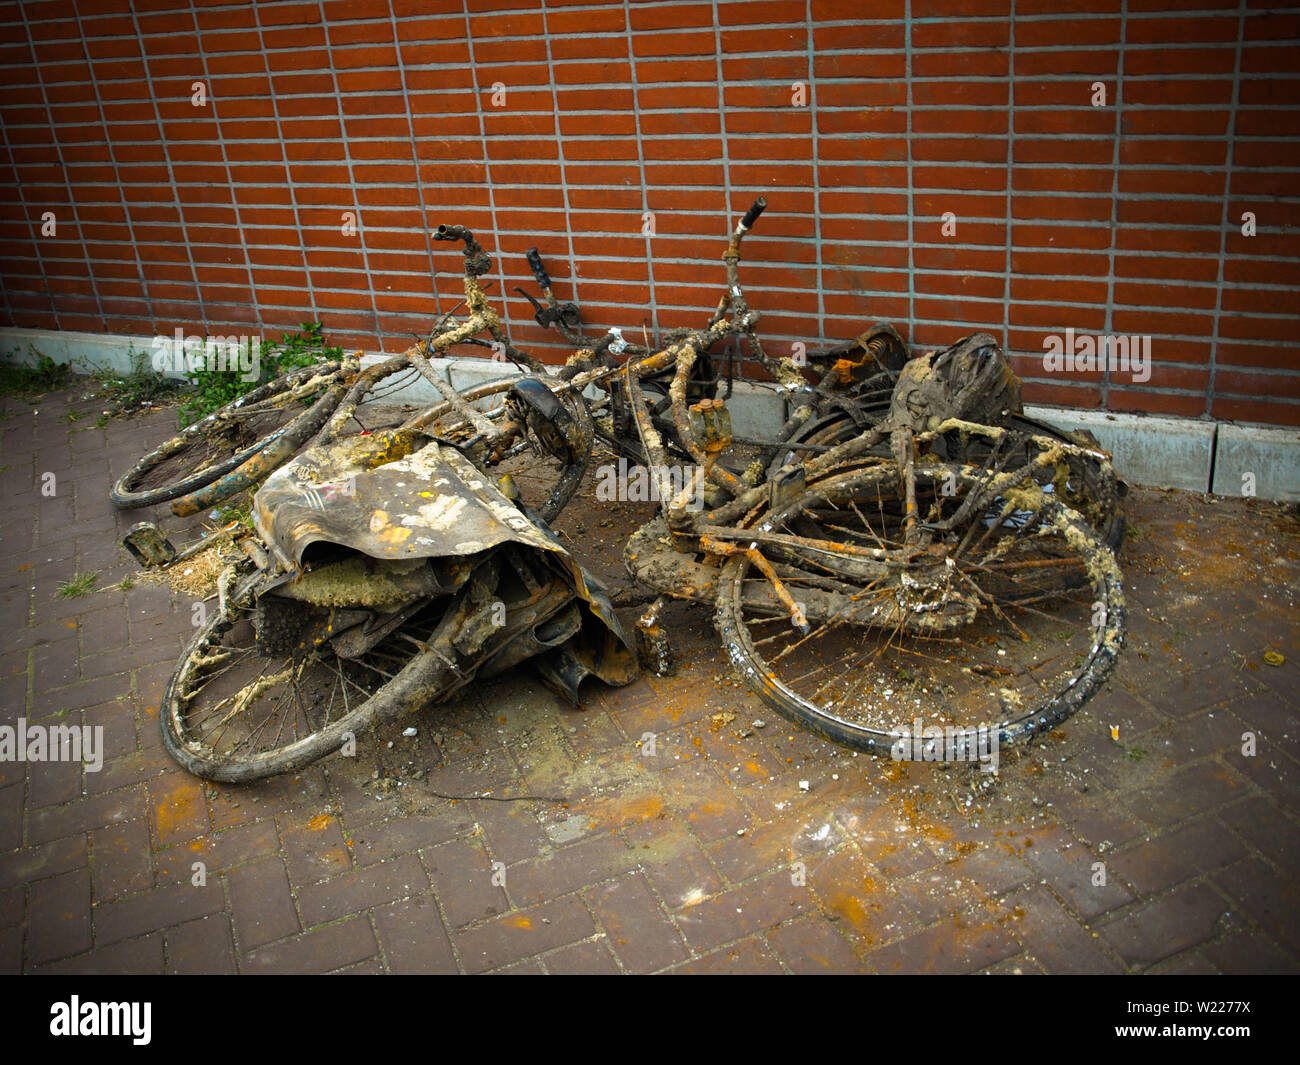 Bicycles pulled out of canal in Amsterdam. Old and rusty bikes piled up in street. Stock Photo